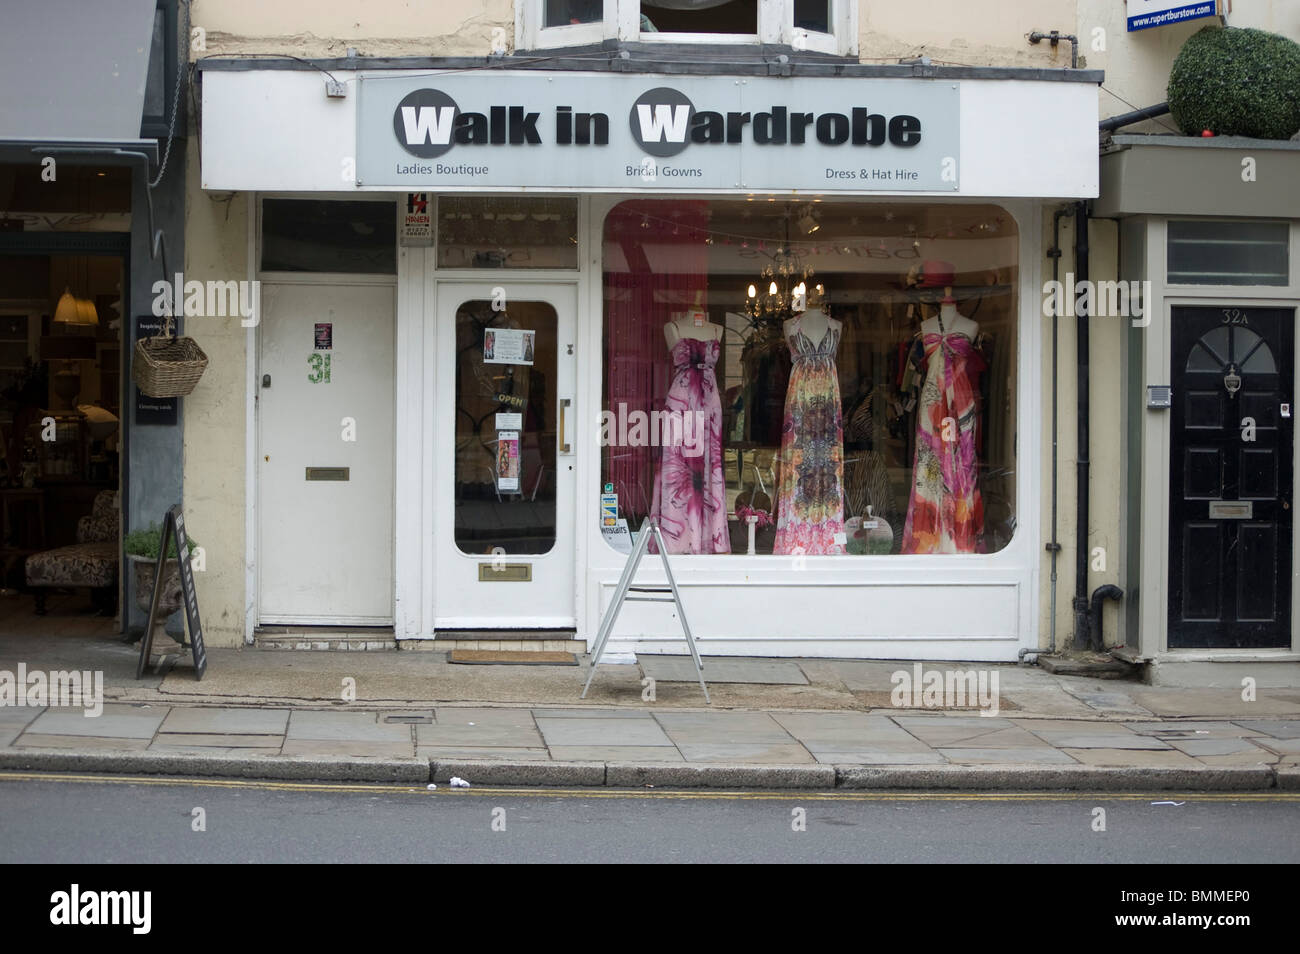 Boutique Shop Front Uk High Resolution Stock Photography and Images - Alamy